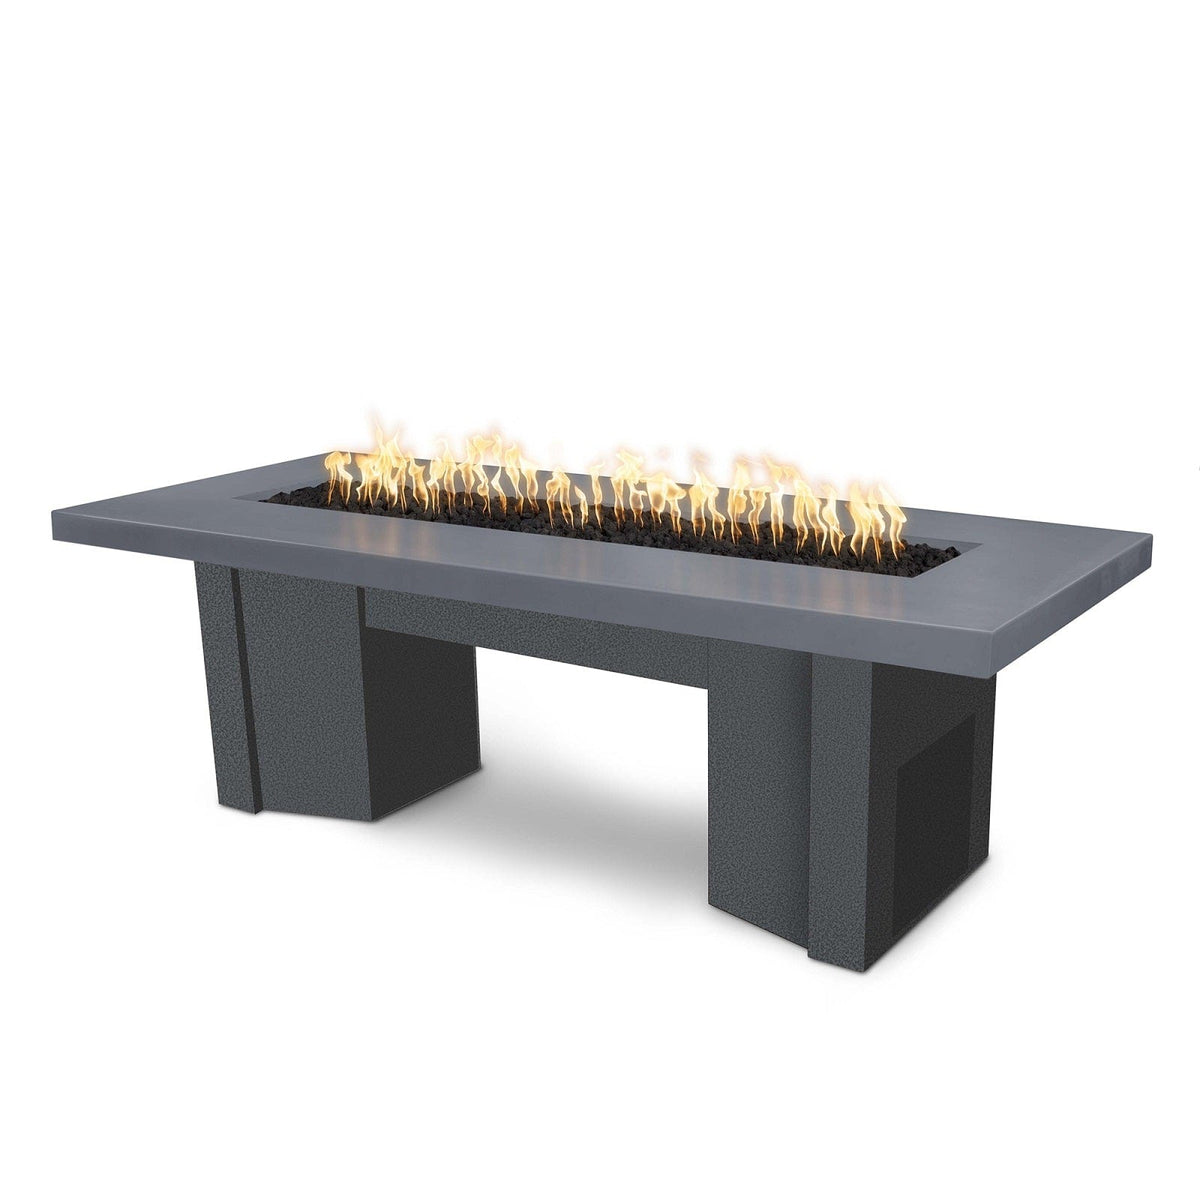 The Outdoor Plus Fire Features Gray (-GRY) / Silver Vein Powder Coated Steel (-SLV) The Outdoor Plus 60&quot; Alameda Fire Table Smooth Concrete in Liquid Propane - 12V Electronic Ignition / OPT-ALMGFRC60E12V-LP